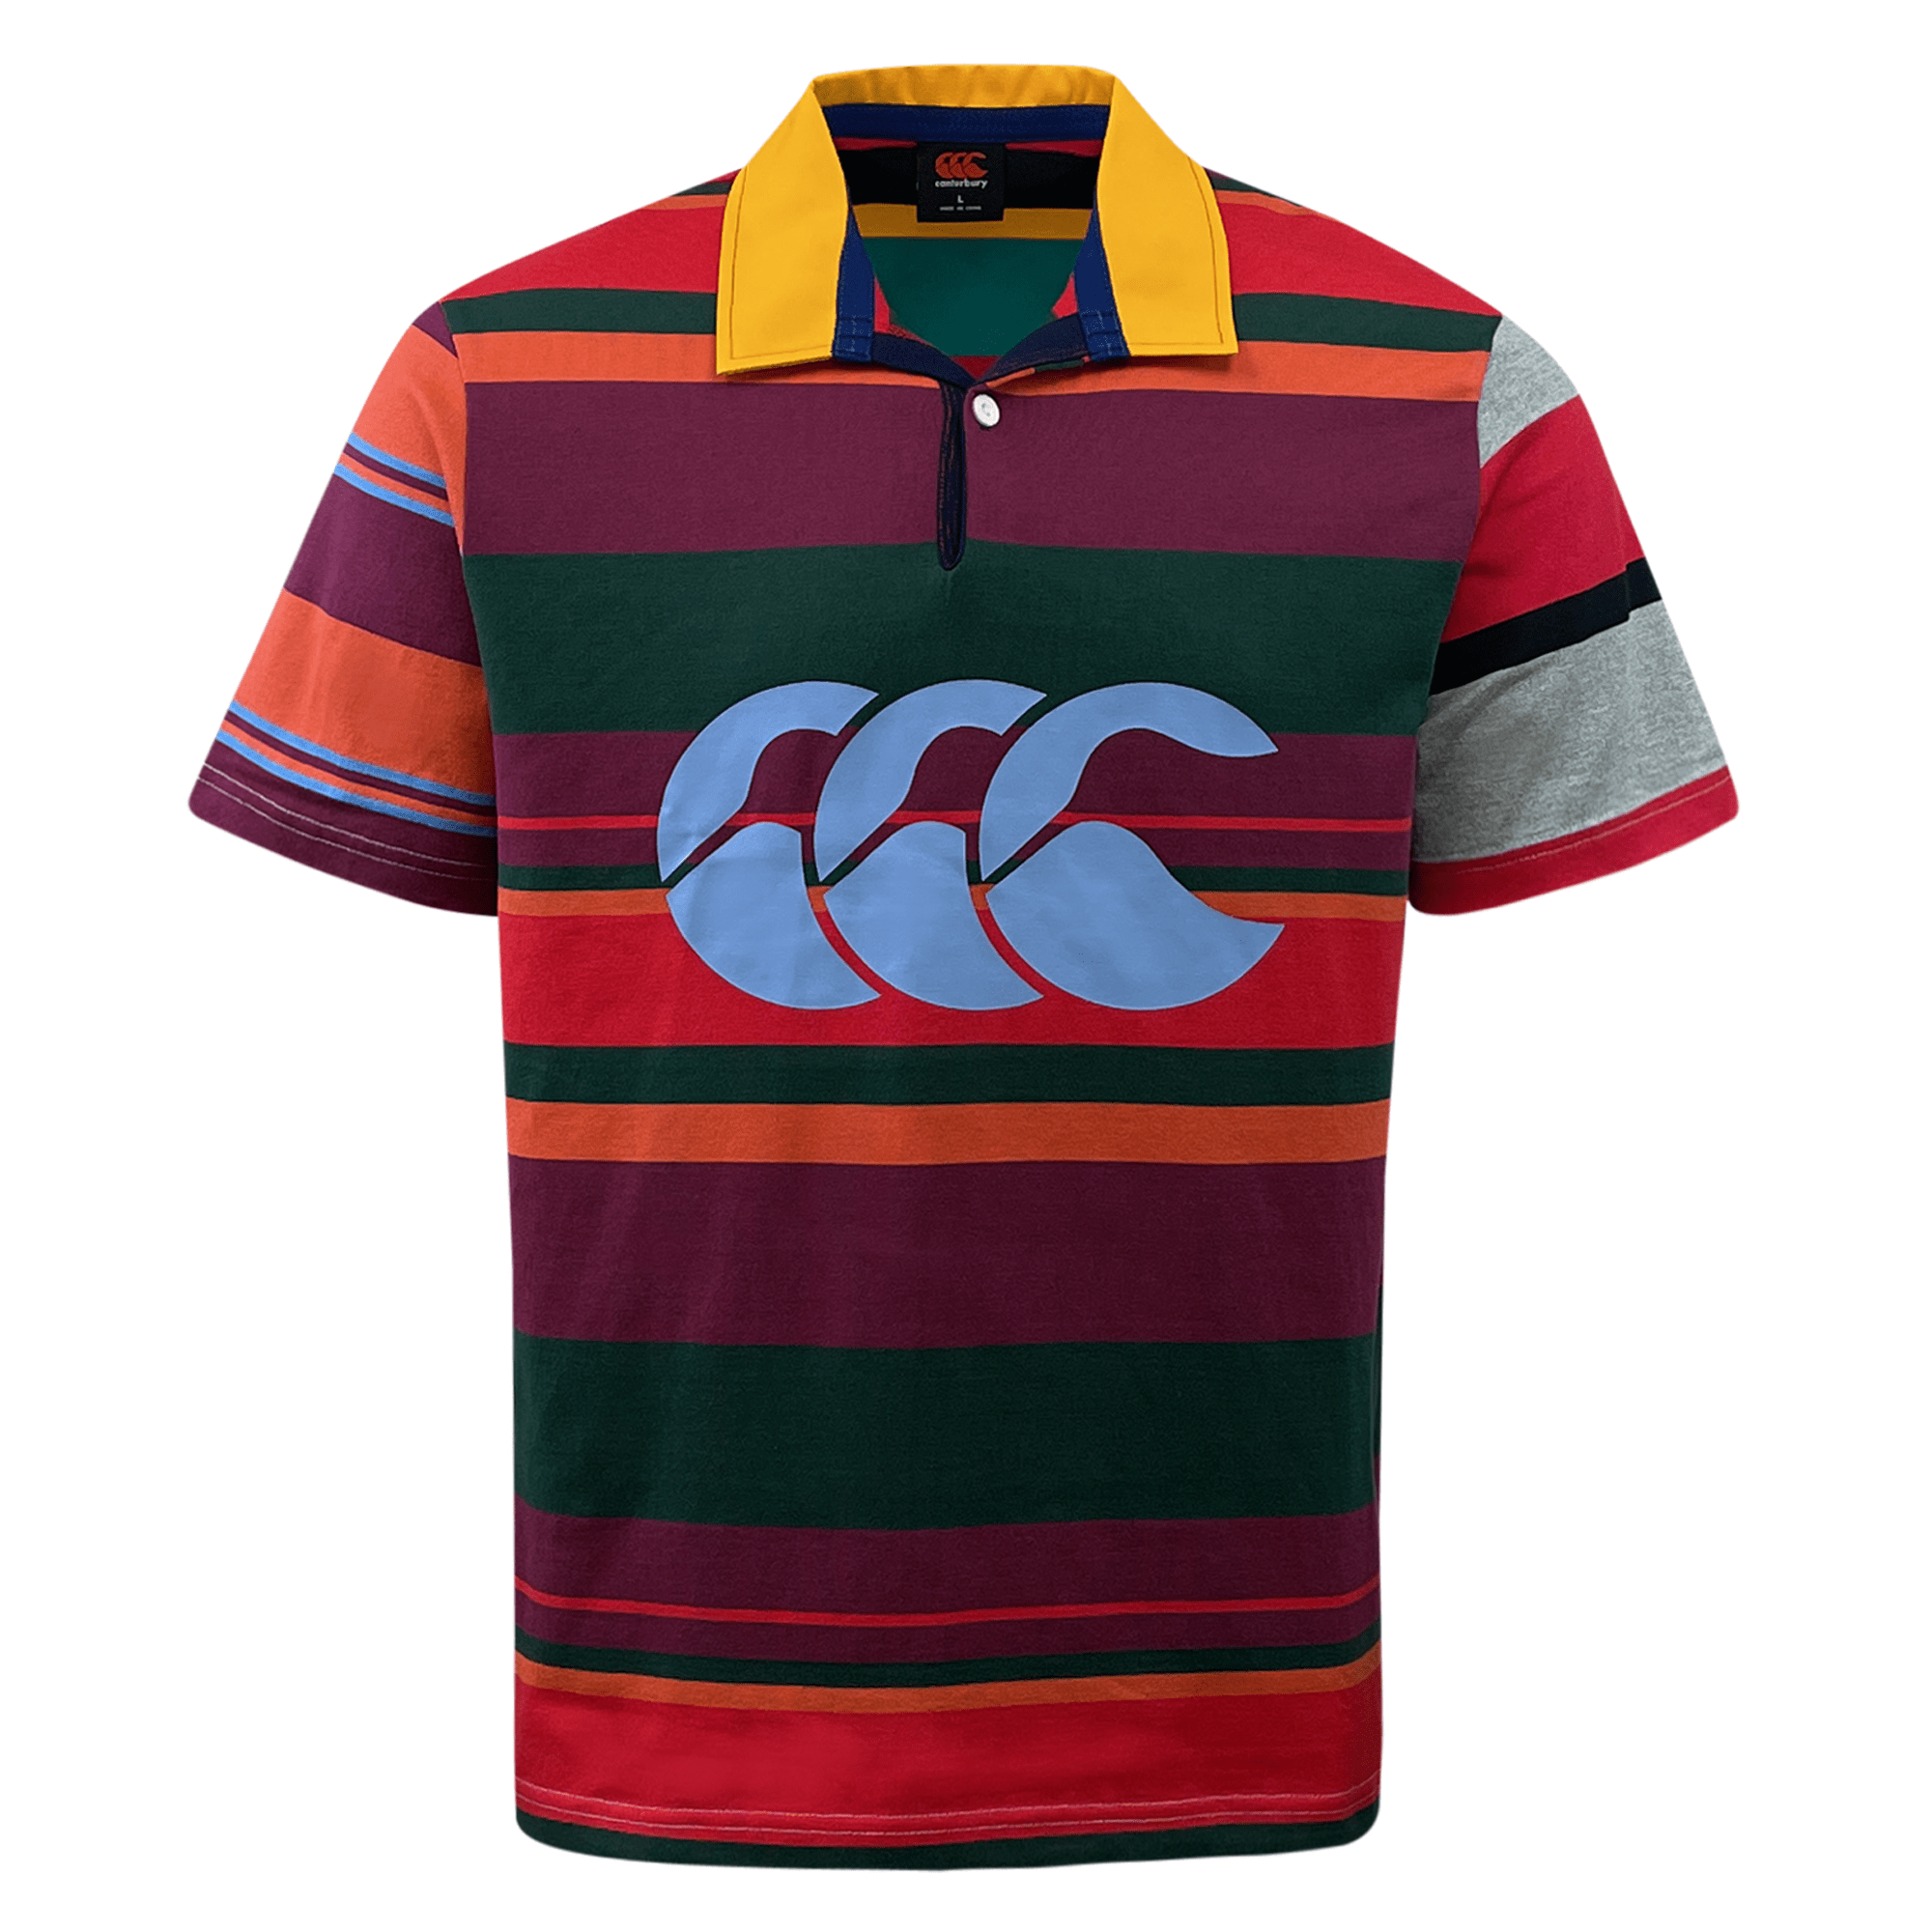 Canterbury CCC Rugby Kicking Tee - The Rugby Shop